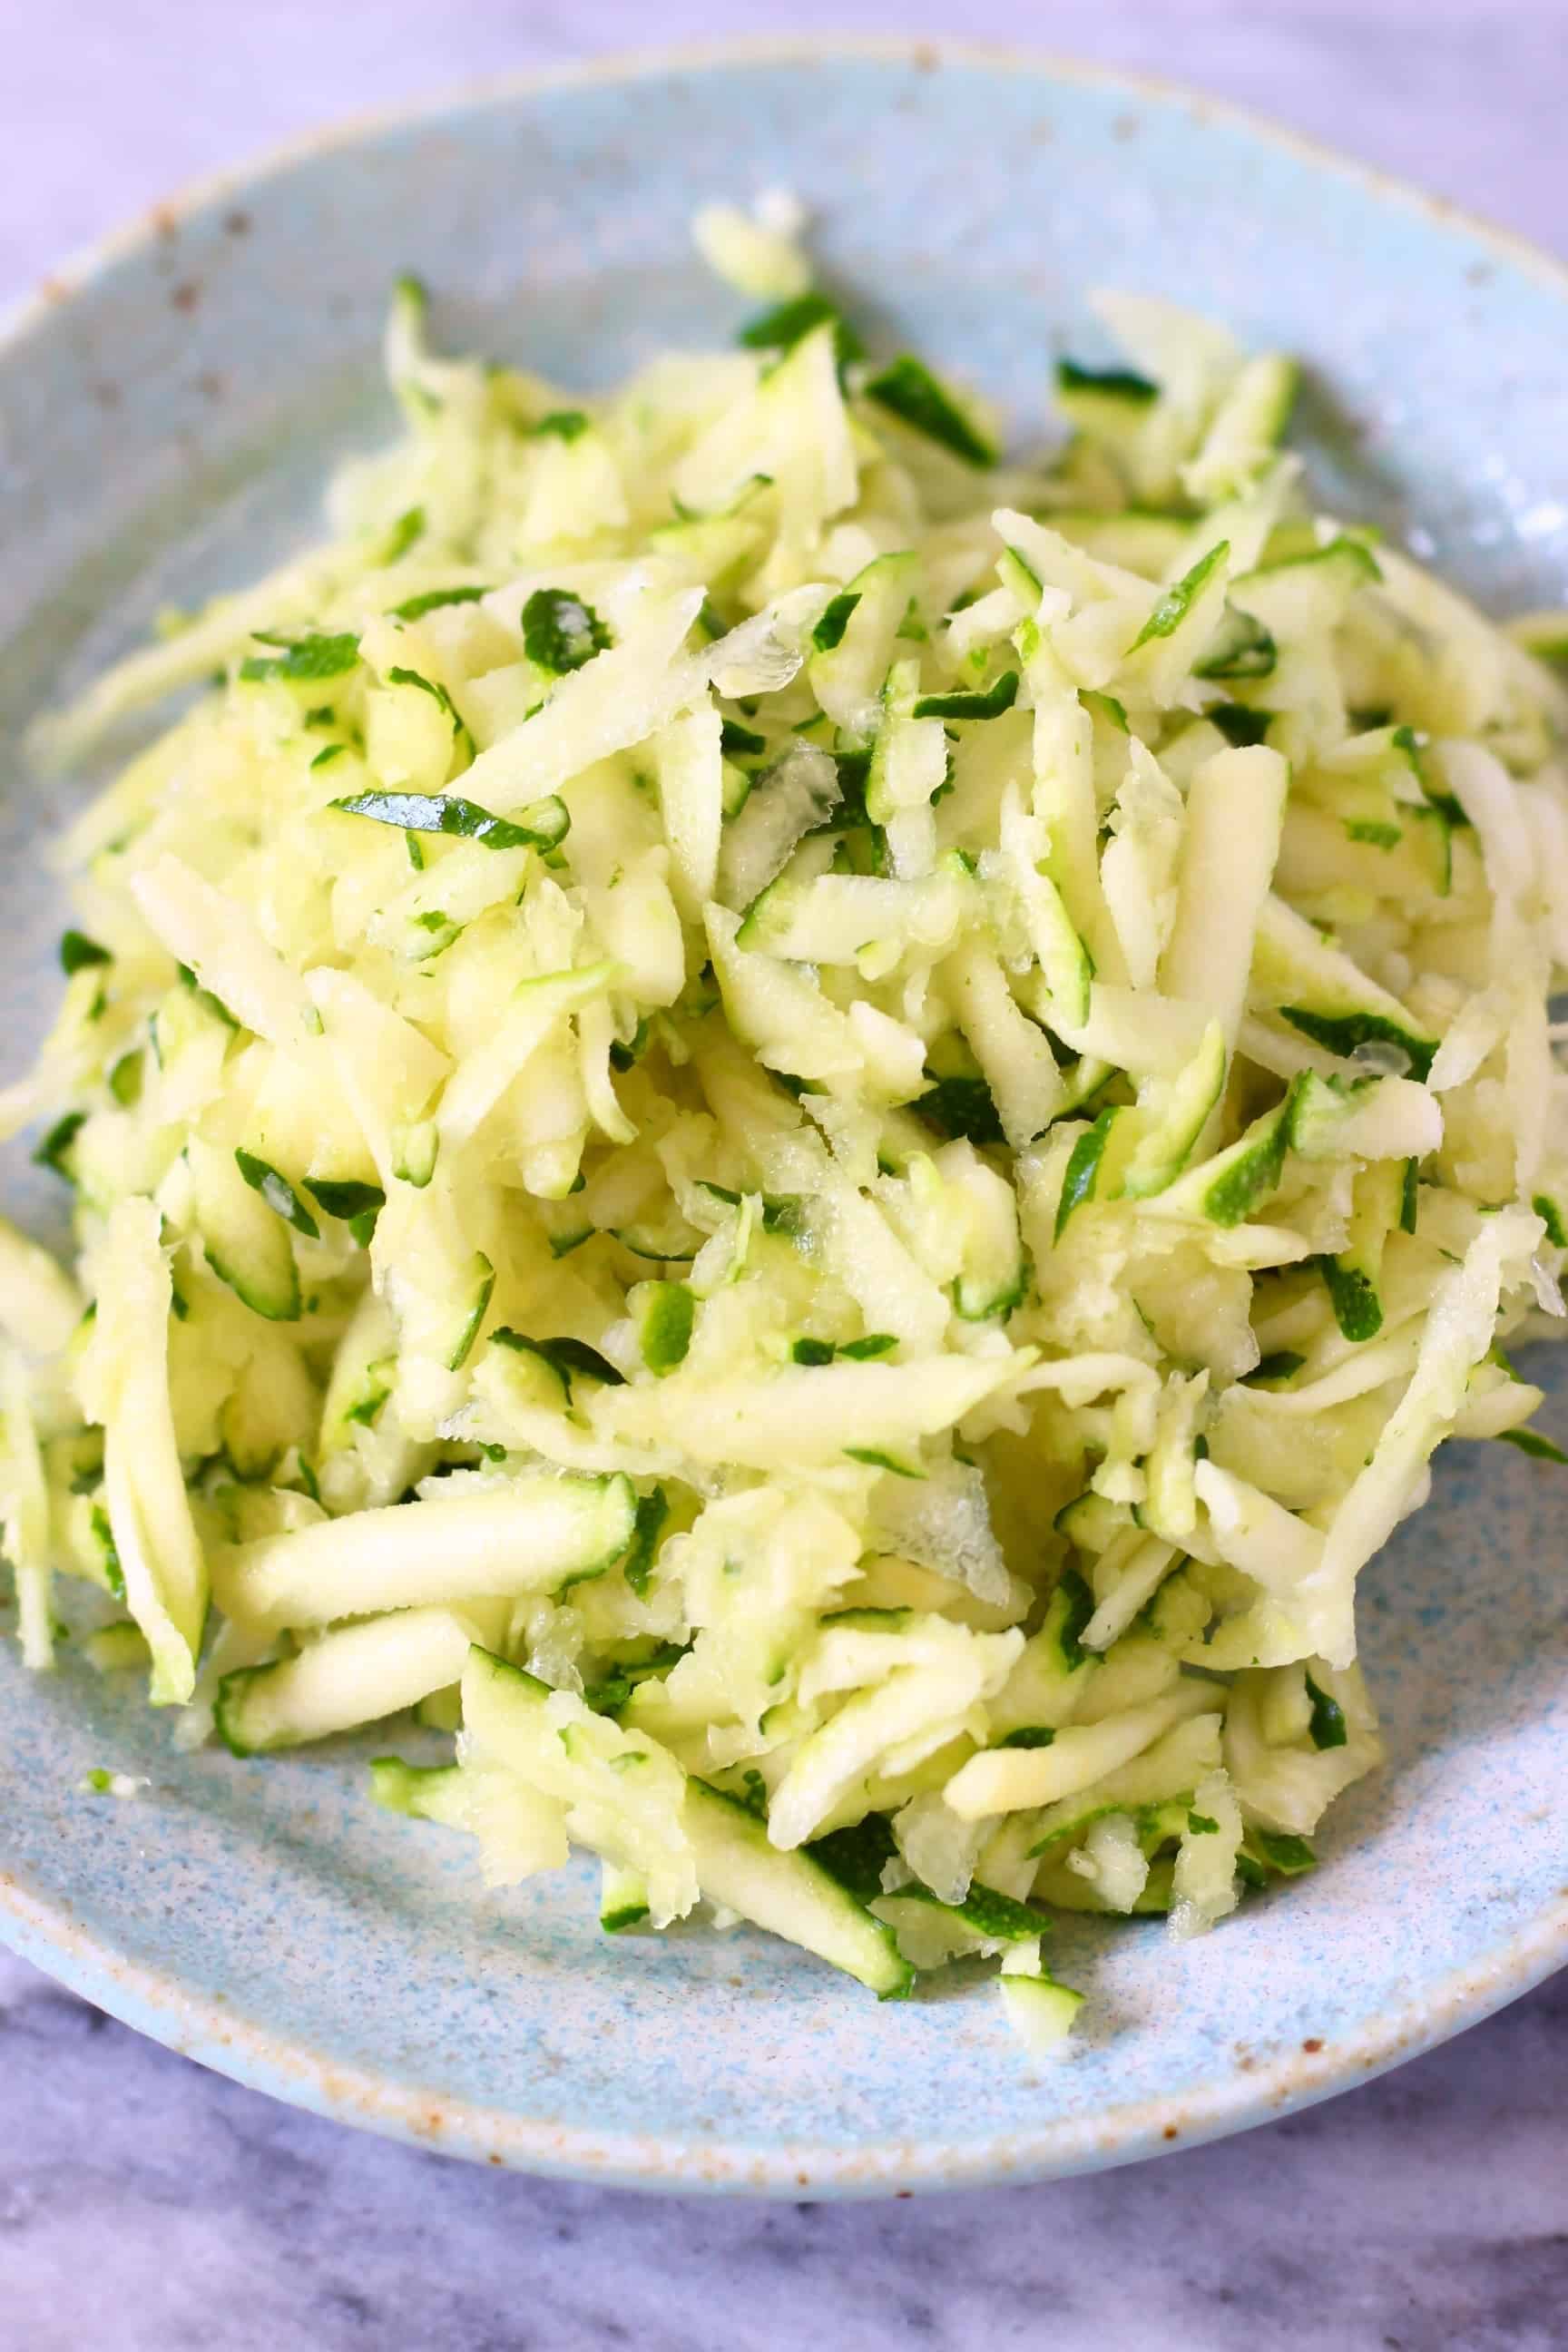 A pile of grated zucchini on a blue plate 